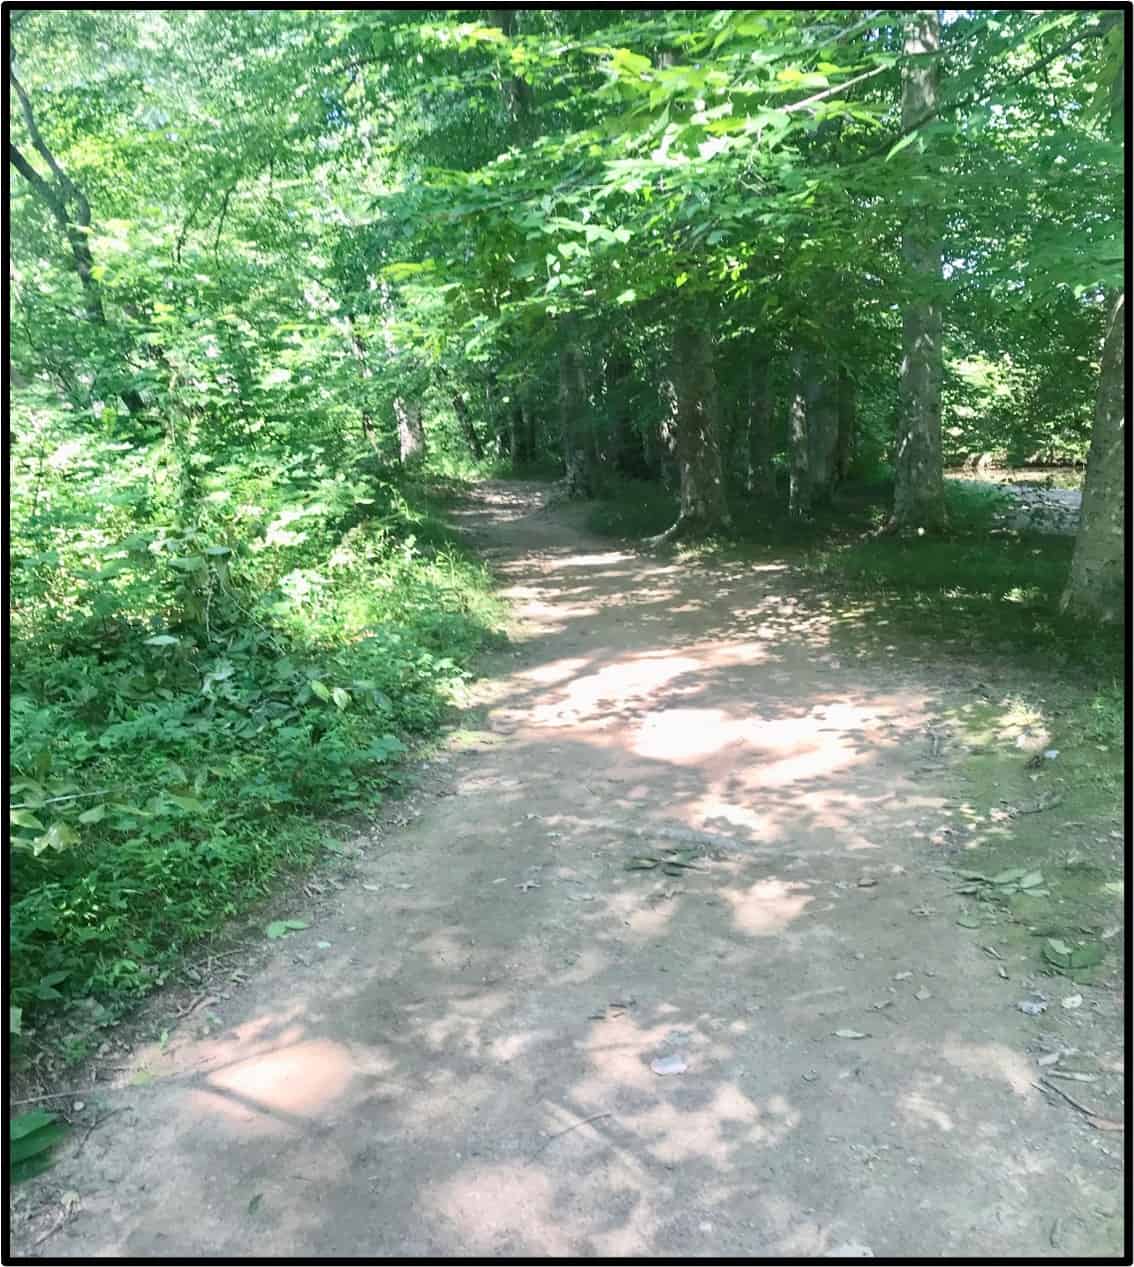 Path through Wooded Area - Original Boone Trace